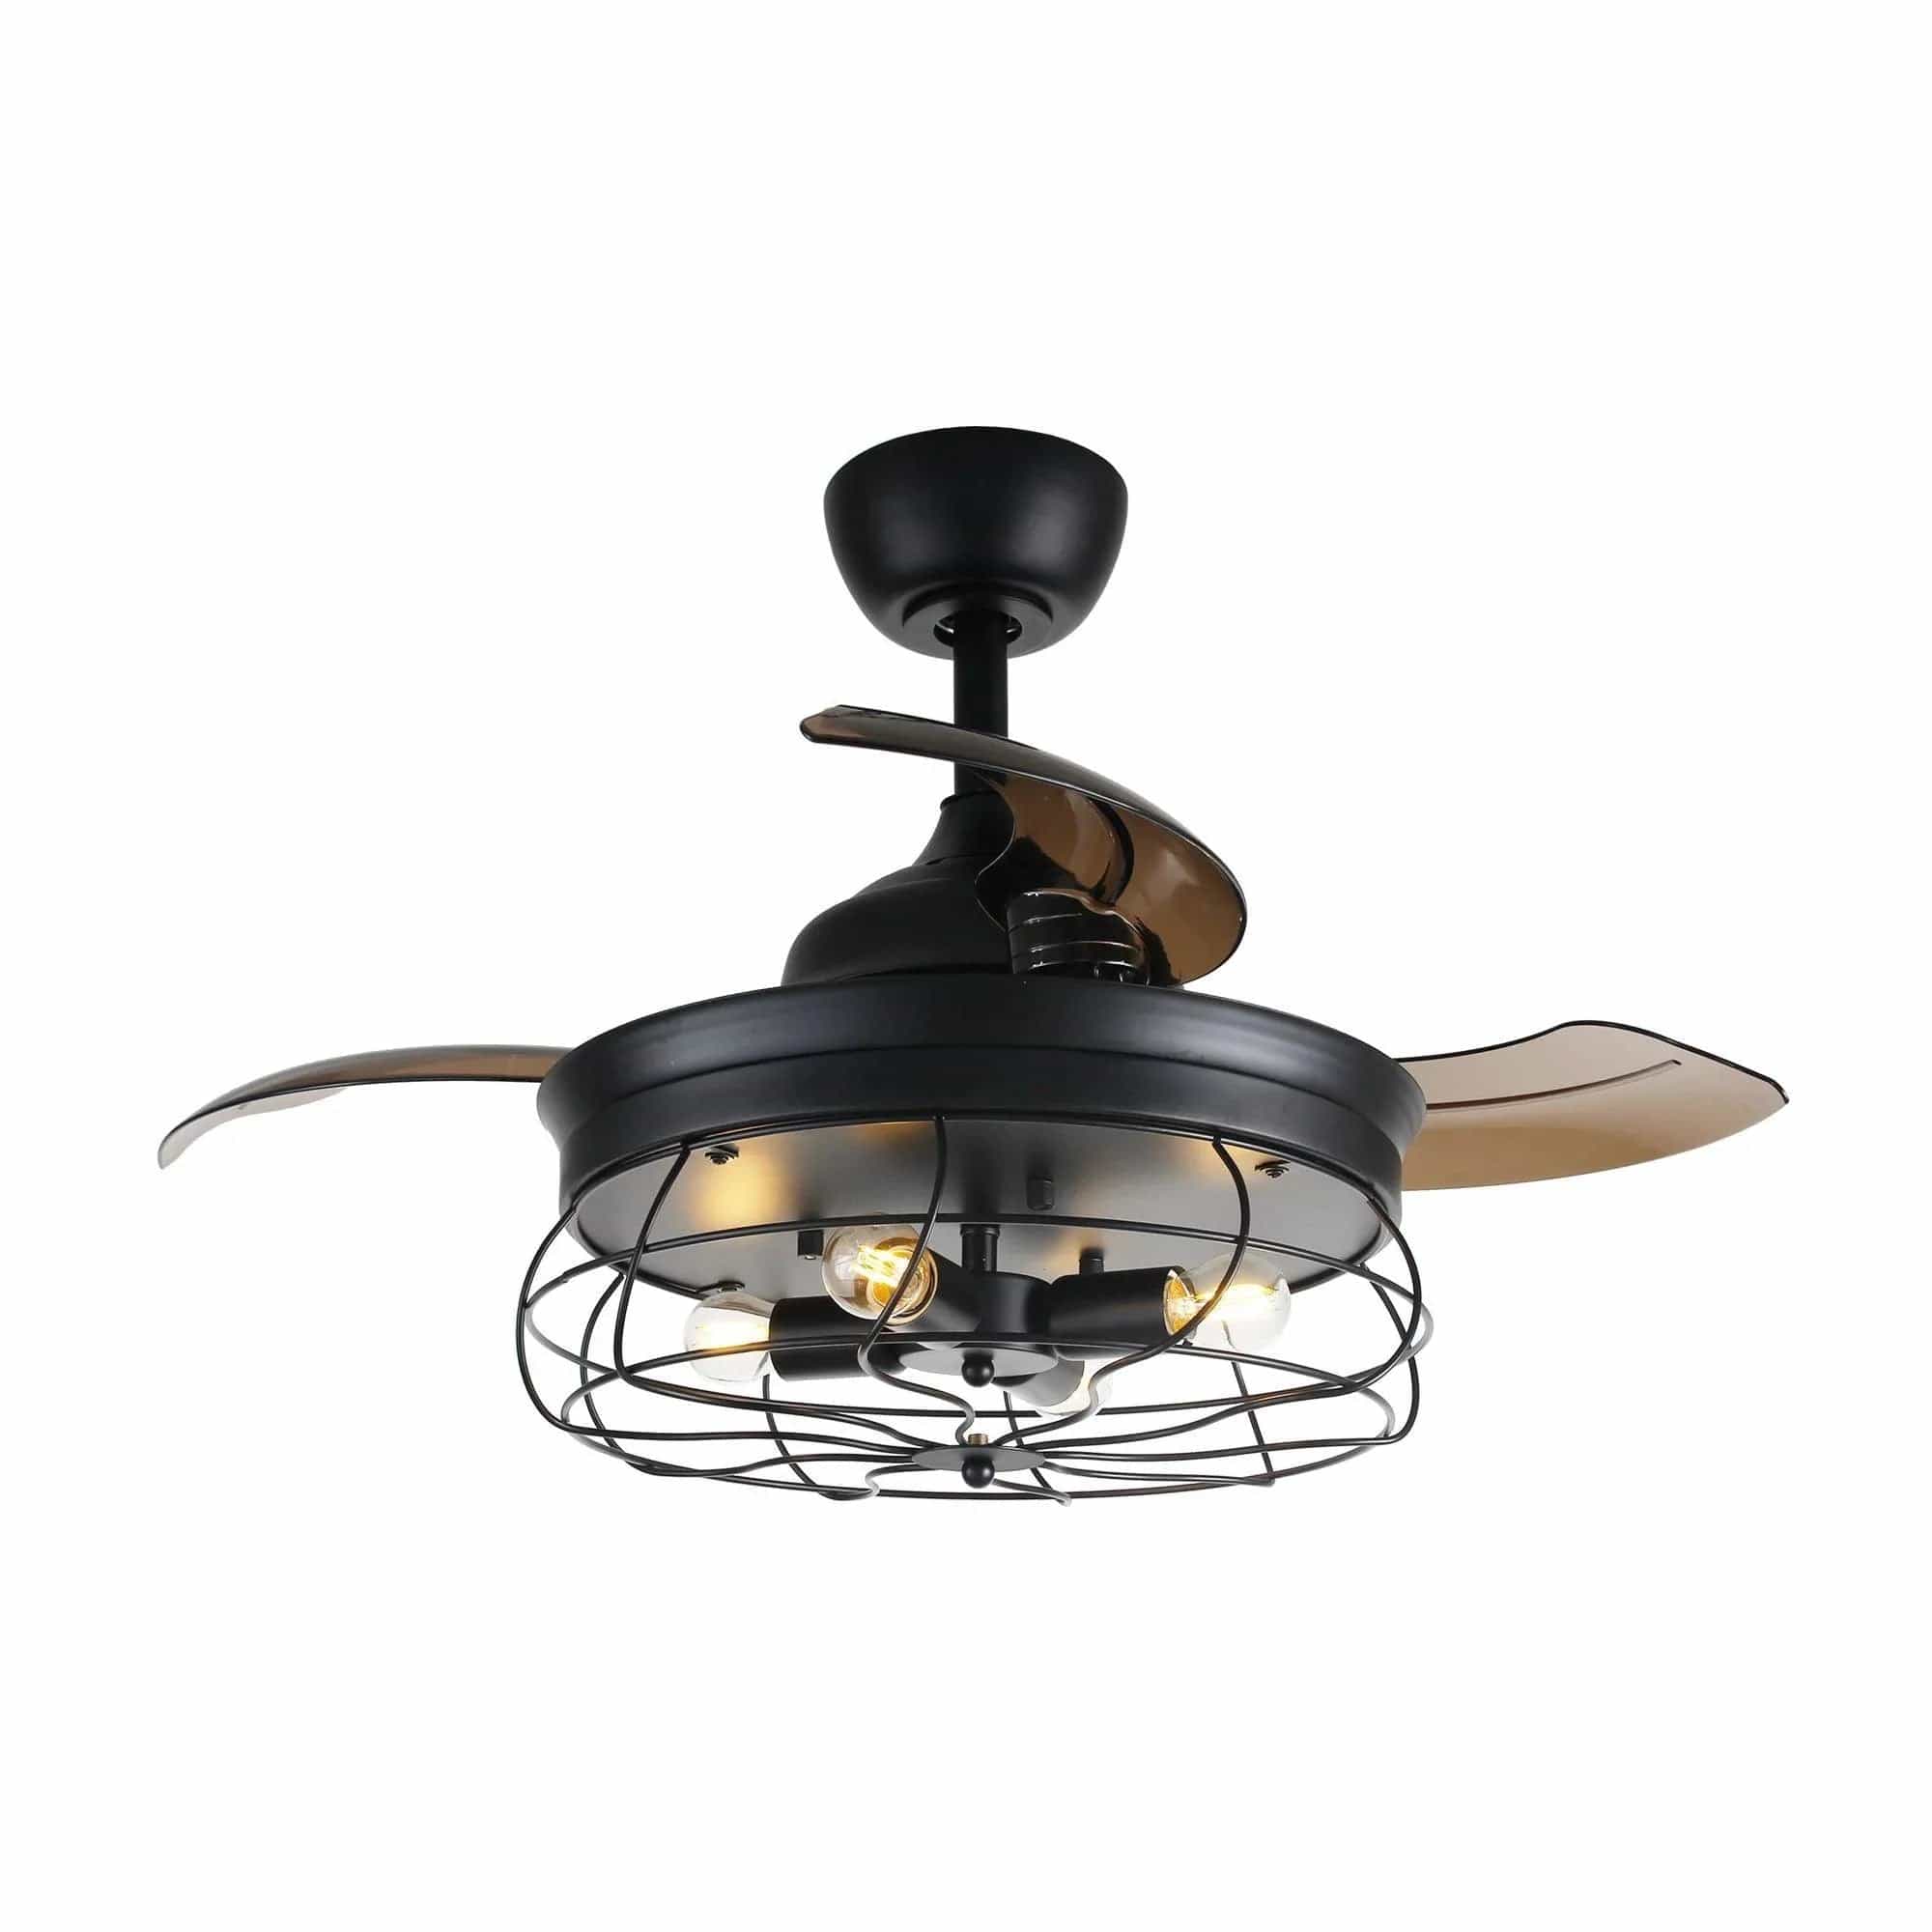 Parrot Uncle Parrot Uncle 34 In. Benally Industrial Ceiling Fan with Lighting and Remote Control Ceiling Fan F3501Q110V